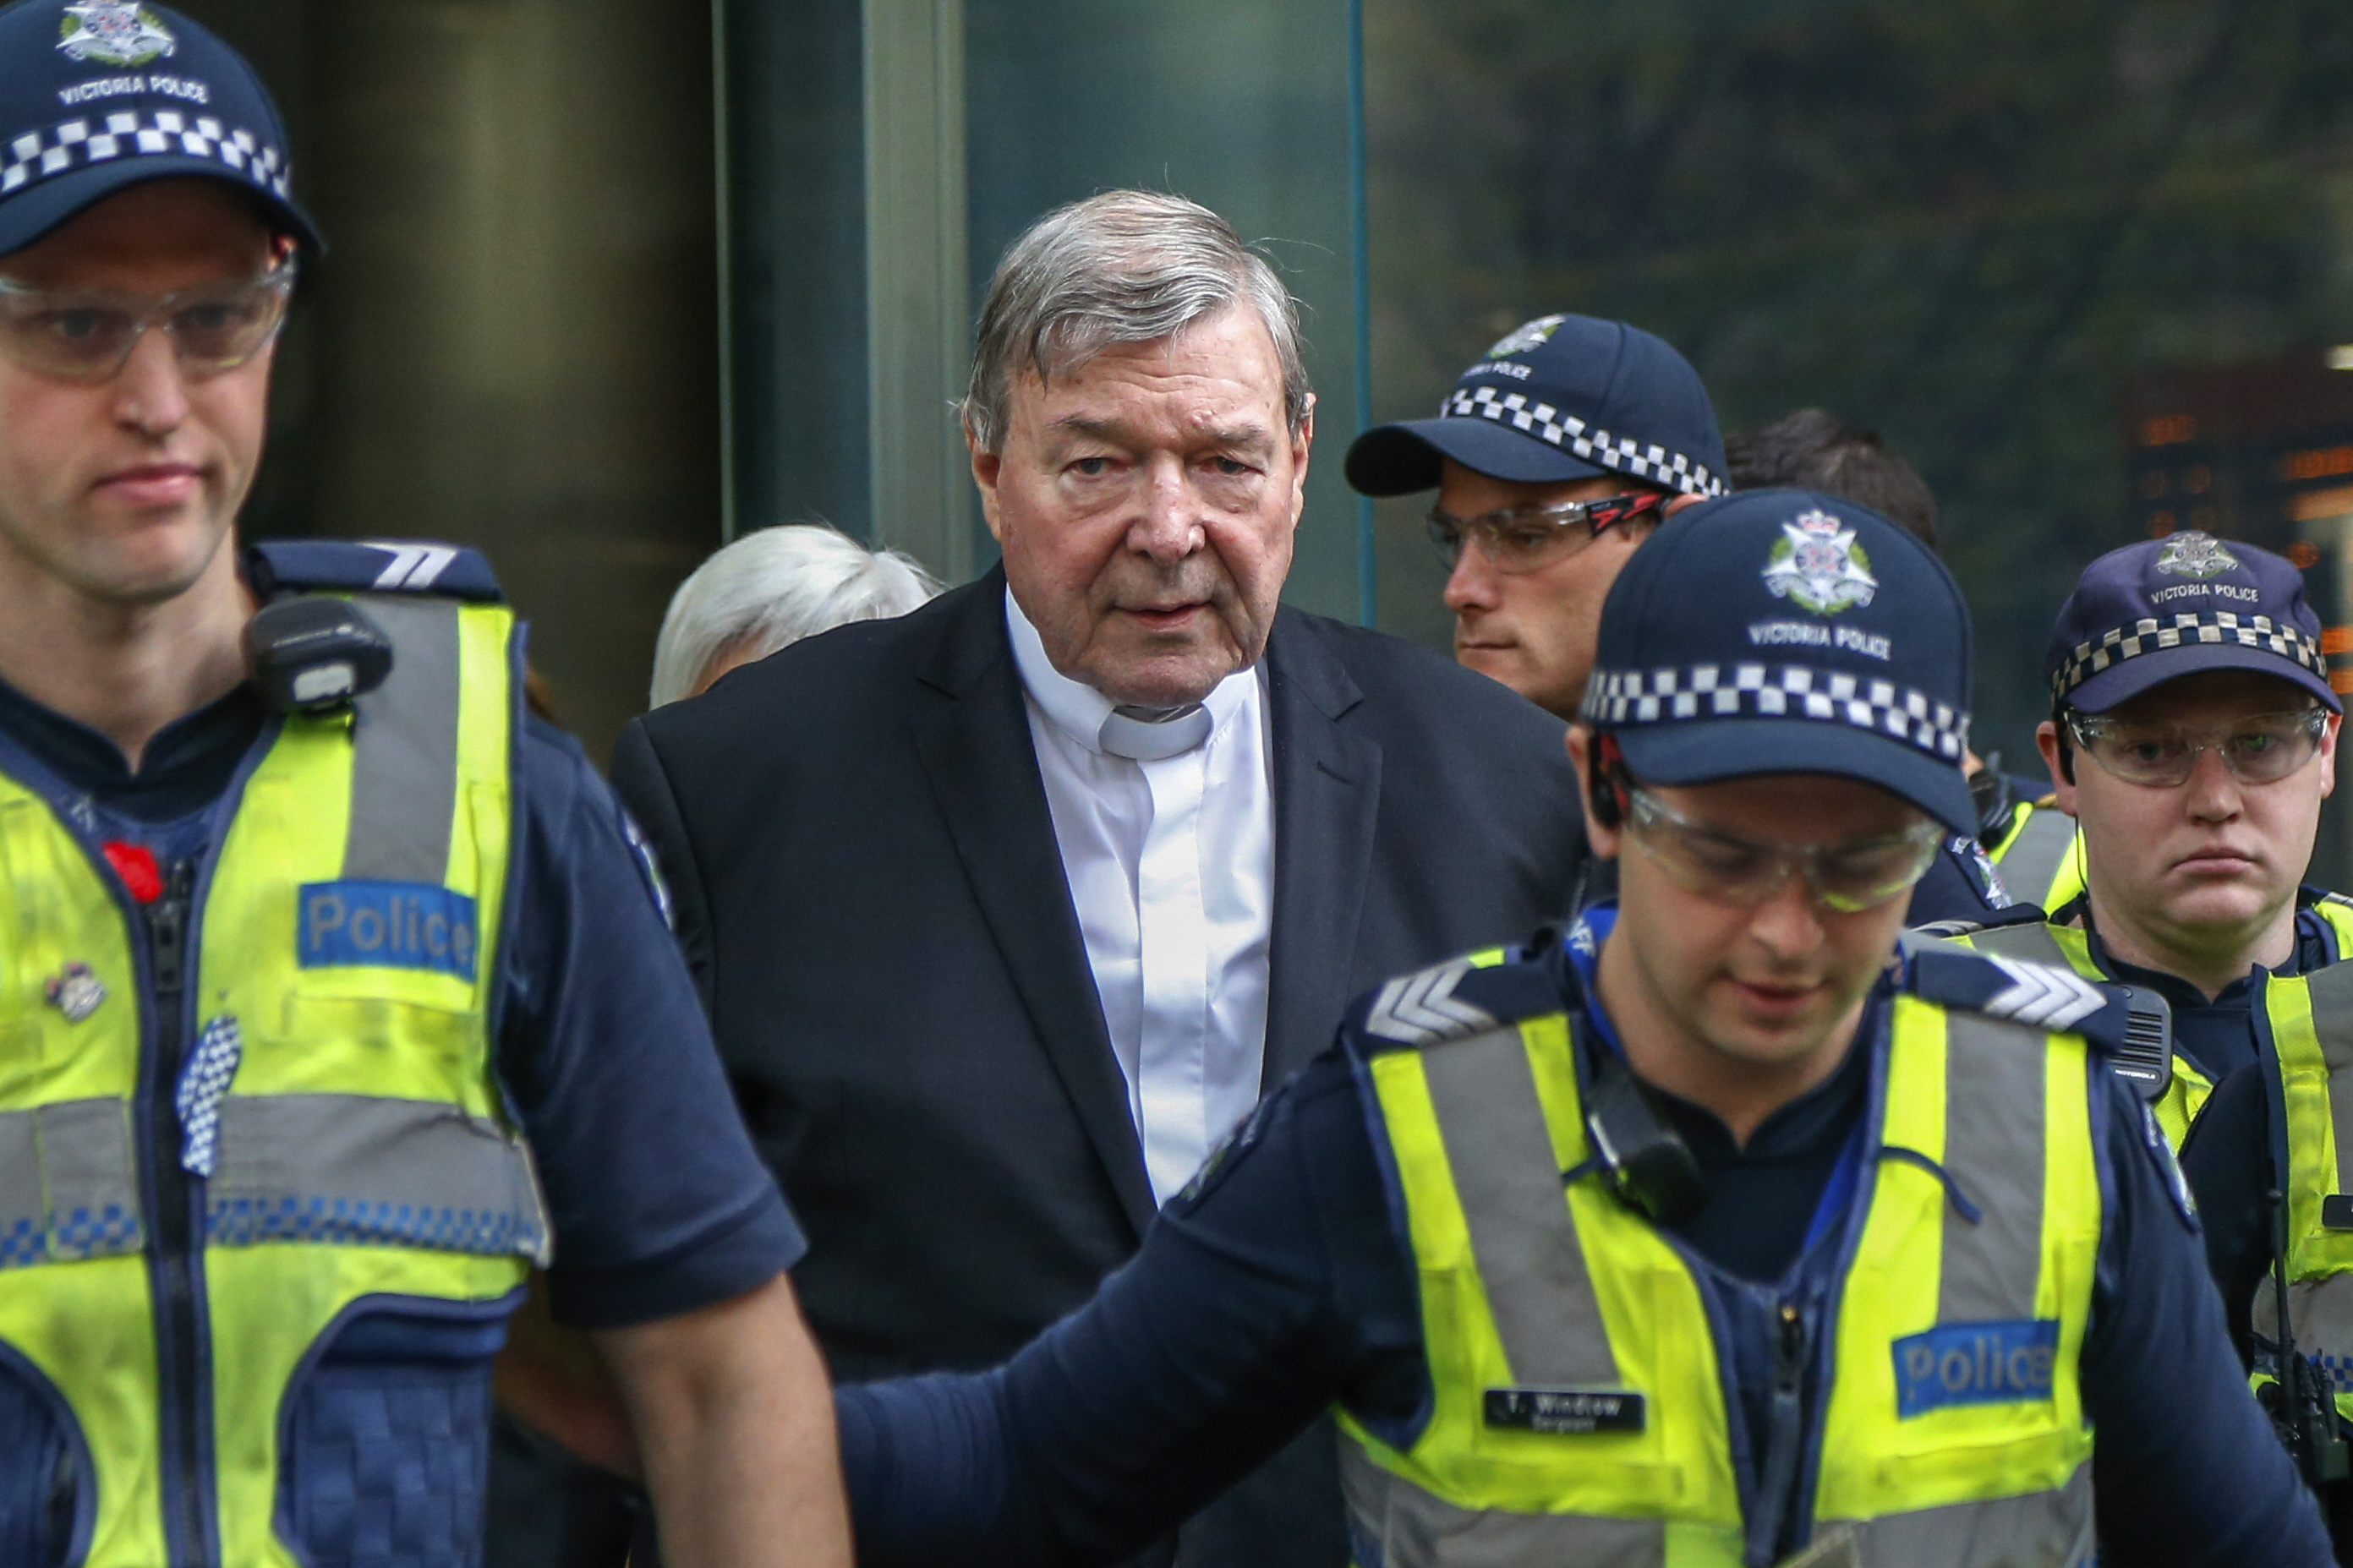 George Pell’s Appeal Verdict Will Be Handed Down Next Week